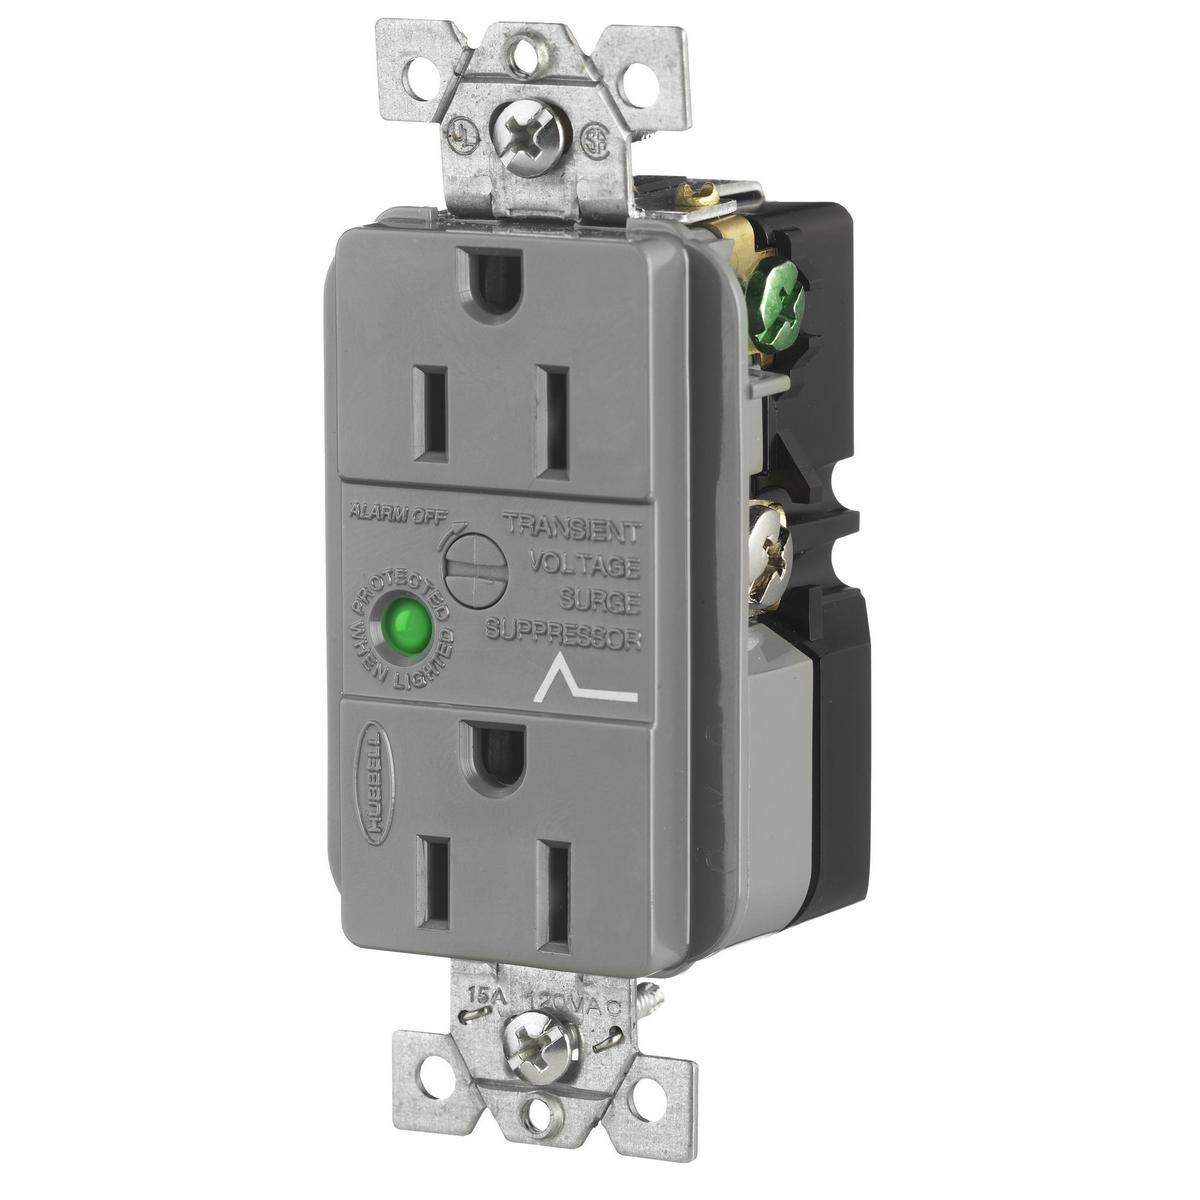 Hubbell HBL5262GYSA TVSS Duplex Receptacle with Light and Alarm, 15A 125V, 5-15R, Gray  ; Automatic self-grounding staple ; Distinctive surge symbol provides quick identification ; Power-on indicator light verifies that power is available ; Alert alarm sounds when surge prot